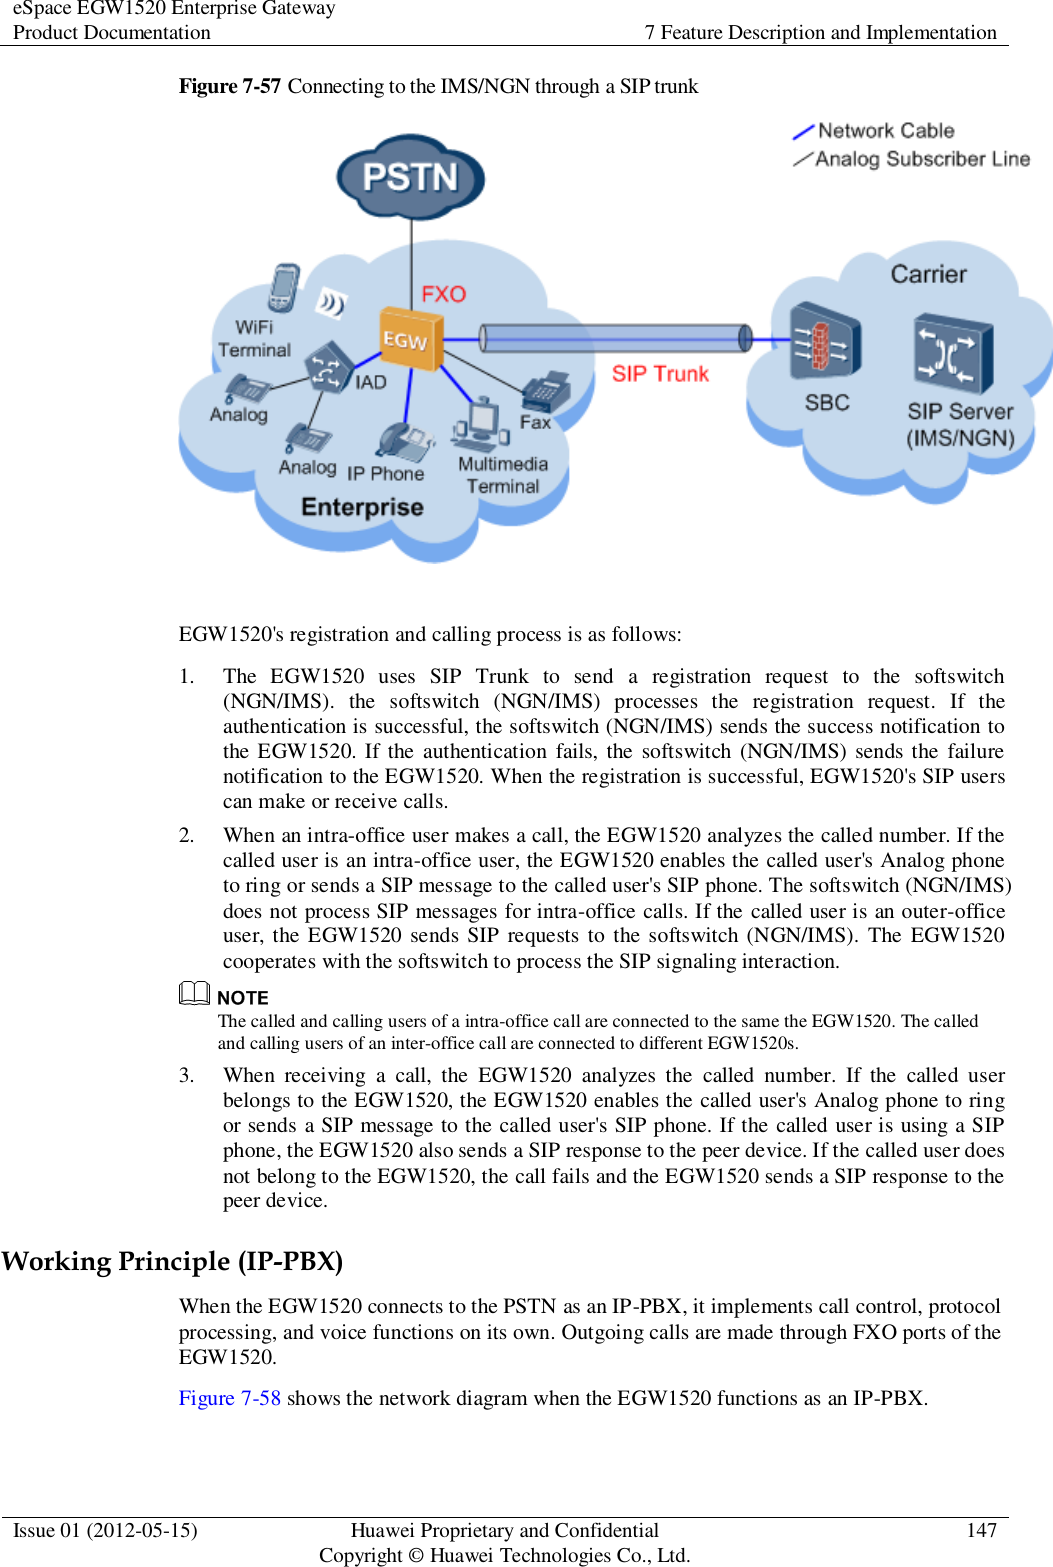 eSpace EGW1520 Enterprise Gateway Product Documentation 7 Feature Description and Implementation  Issue 01 (2012-05-15) Huawei Proprietary and Confidential                                     Copyright © Huawei Technologies Co., Ltd. 147  Figure 7-57 Connecting to the IMS/NGN through a SIP trunk   EGW1520&apos;s registration and calling process is as follows: 1. The  EGW1520  uses  SIP  Trunk  to  send  a  registration  request  to  the  softswitch (NGN/IMS).  the  softswitch  (NGN/IMS)  processes  the  registration  request.  If  the authentication is successful, the softswitch (NGN/IMS) sends the success notification to the EGW1520. If the  authentication fails, the softswitch (NGN/IMS) sends the  failure notification to the EGW1520. When the registration is successful, EGW1520&apos;s SIP users can make or receive calls. 2. When an intra-office user makes a call, the EGW1520 analyzes the called number. If the called user is an intra-office user, the EGW1520 enables the called user&apos;s Analog phone to ring or sends a SIP message to the called user&apos;s SIP phone. The softswitch (NGN/IMS) does not process SIP messages for intra-office calls. If the called user is an outer-office user, the EGW1520 sends SIP requests to the softswitch (NGN/IMS). The EGW1520 cooperates with the softswitch to process the SIP signaling interaction.  The called and calling users of a intra-office call are connected to the same the EGW1520. The called and calling users of an inter-office call are connected to different EGW1520s. 3. When  receiving  a  call,  the  EGW1520  analyzes  the  called  number.  If  the  called  user belongs to the EGW1520, the EGW1520 enables the called user&apos;s Analog phone to ring or sends a SIP message to the called user&apos;s SIP phone. If the called user is using a SIP phone, the EGW1520 also sends a SIP response to the peer device. If the called user does not belong to the EGW1520, the call fails and the EGW1520 sends a SIP response to the peer device. Working Principle (IP-PBX) When the EGW1520 connects to the PSTN as an IP-PBX, it implements call control, protocol processing, and voice functions on its own. Outgoing calls are made through FXO ports of the EGW1520. Figure 7-58 shows the network diagram when the EGW1520 functions as an IP-PBX. 